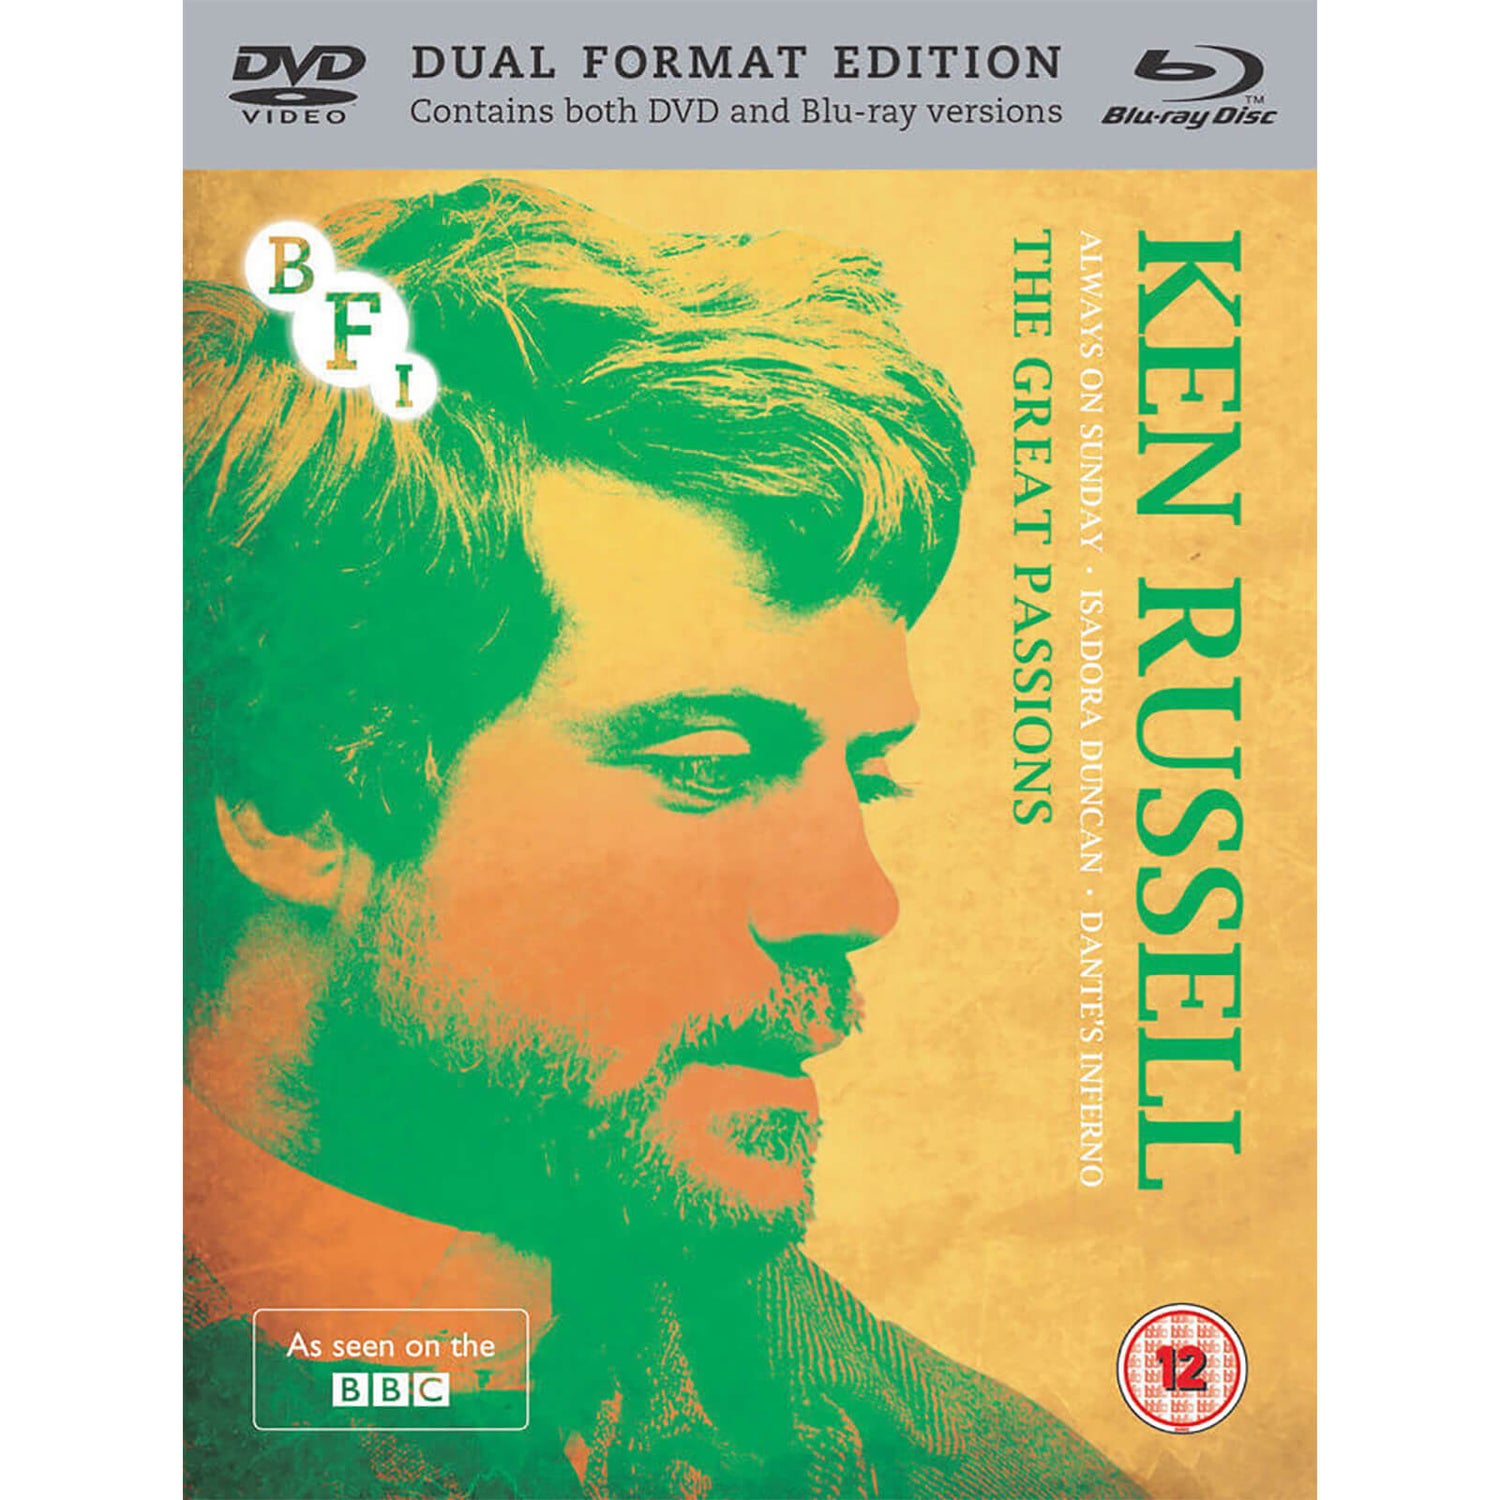 Ken Russell: The Great Passions - Dual Format (Includes DVD)